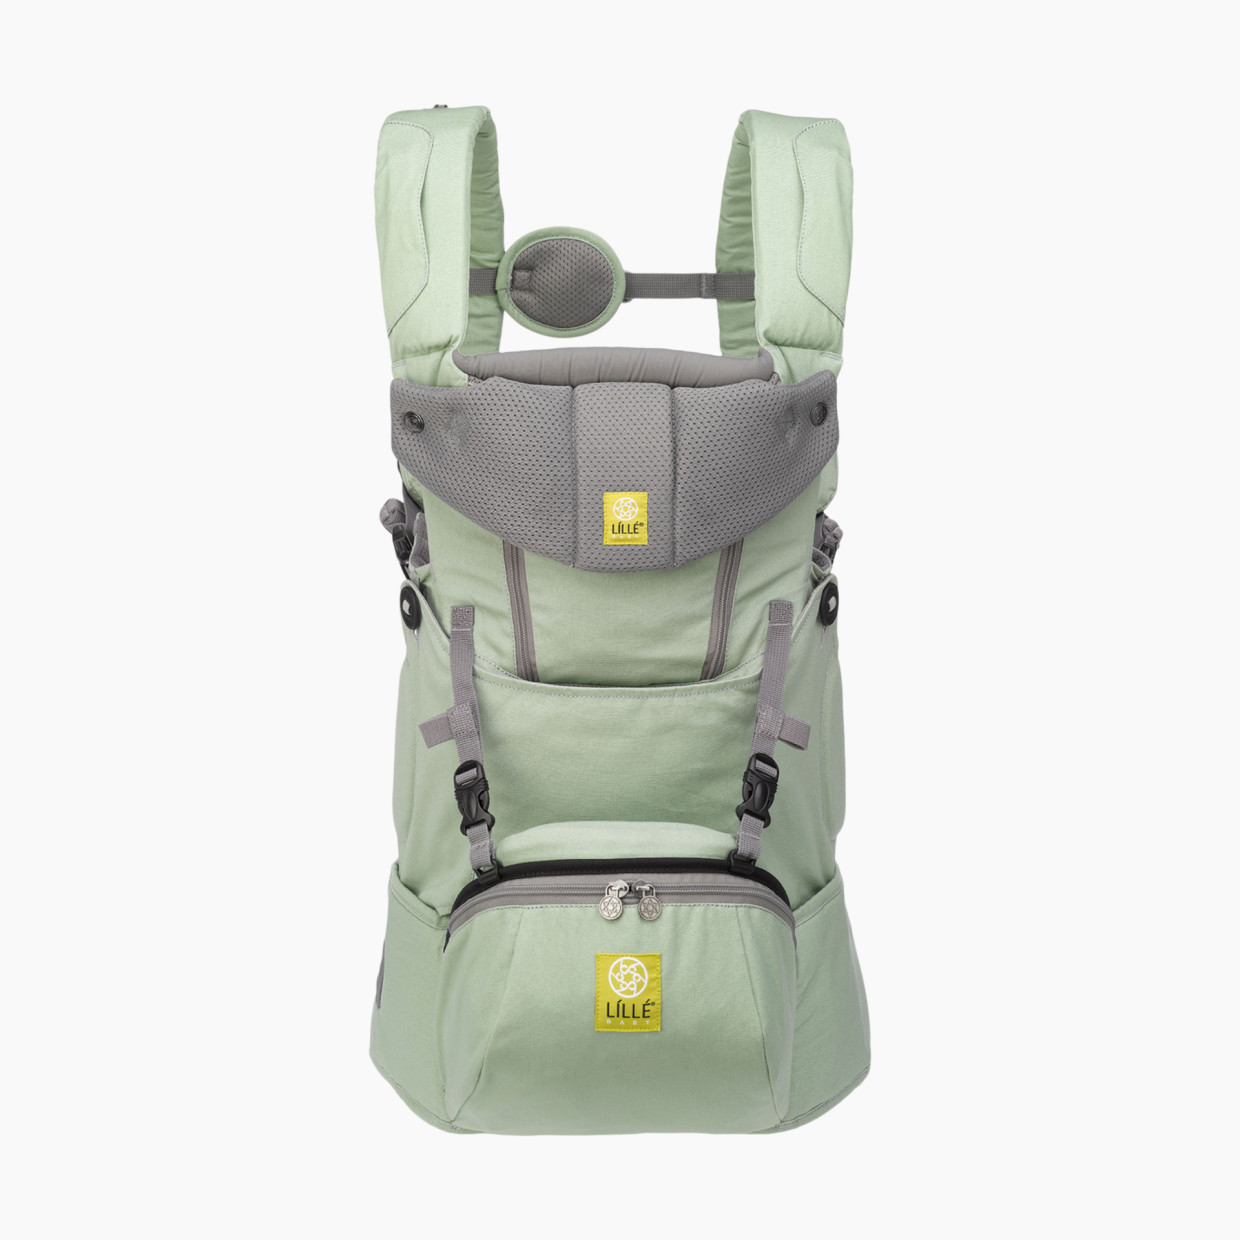 lillebaby SeatMe All Seasons Carrier - Sage.